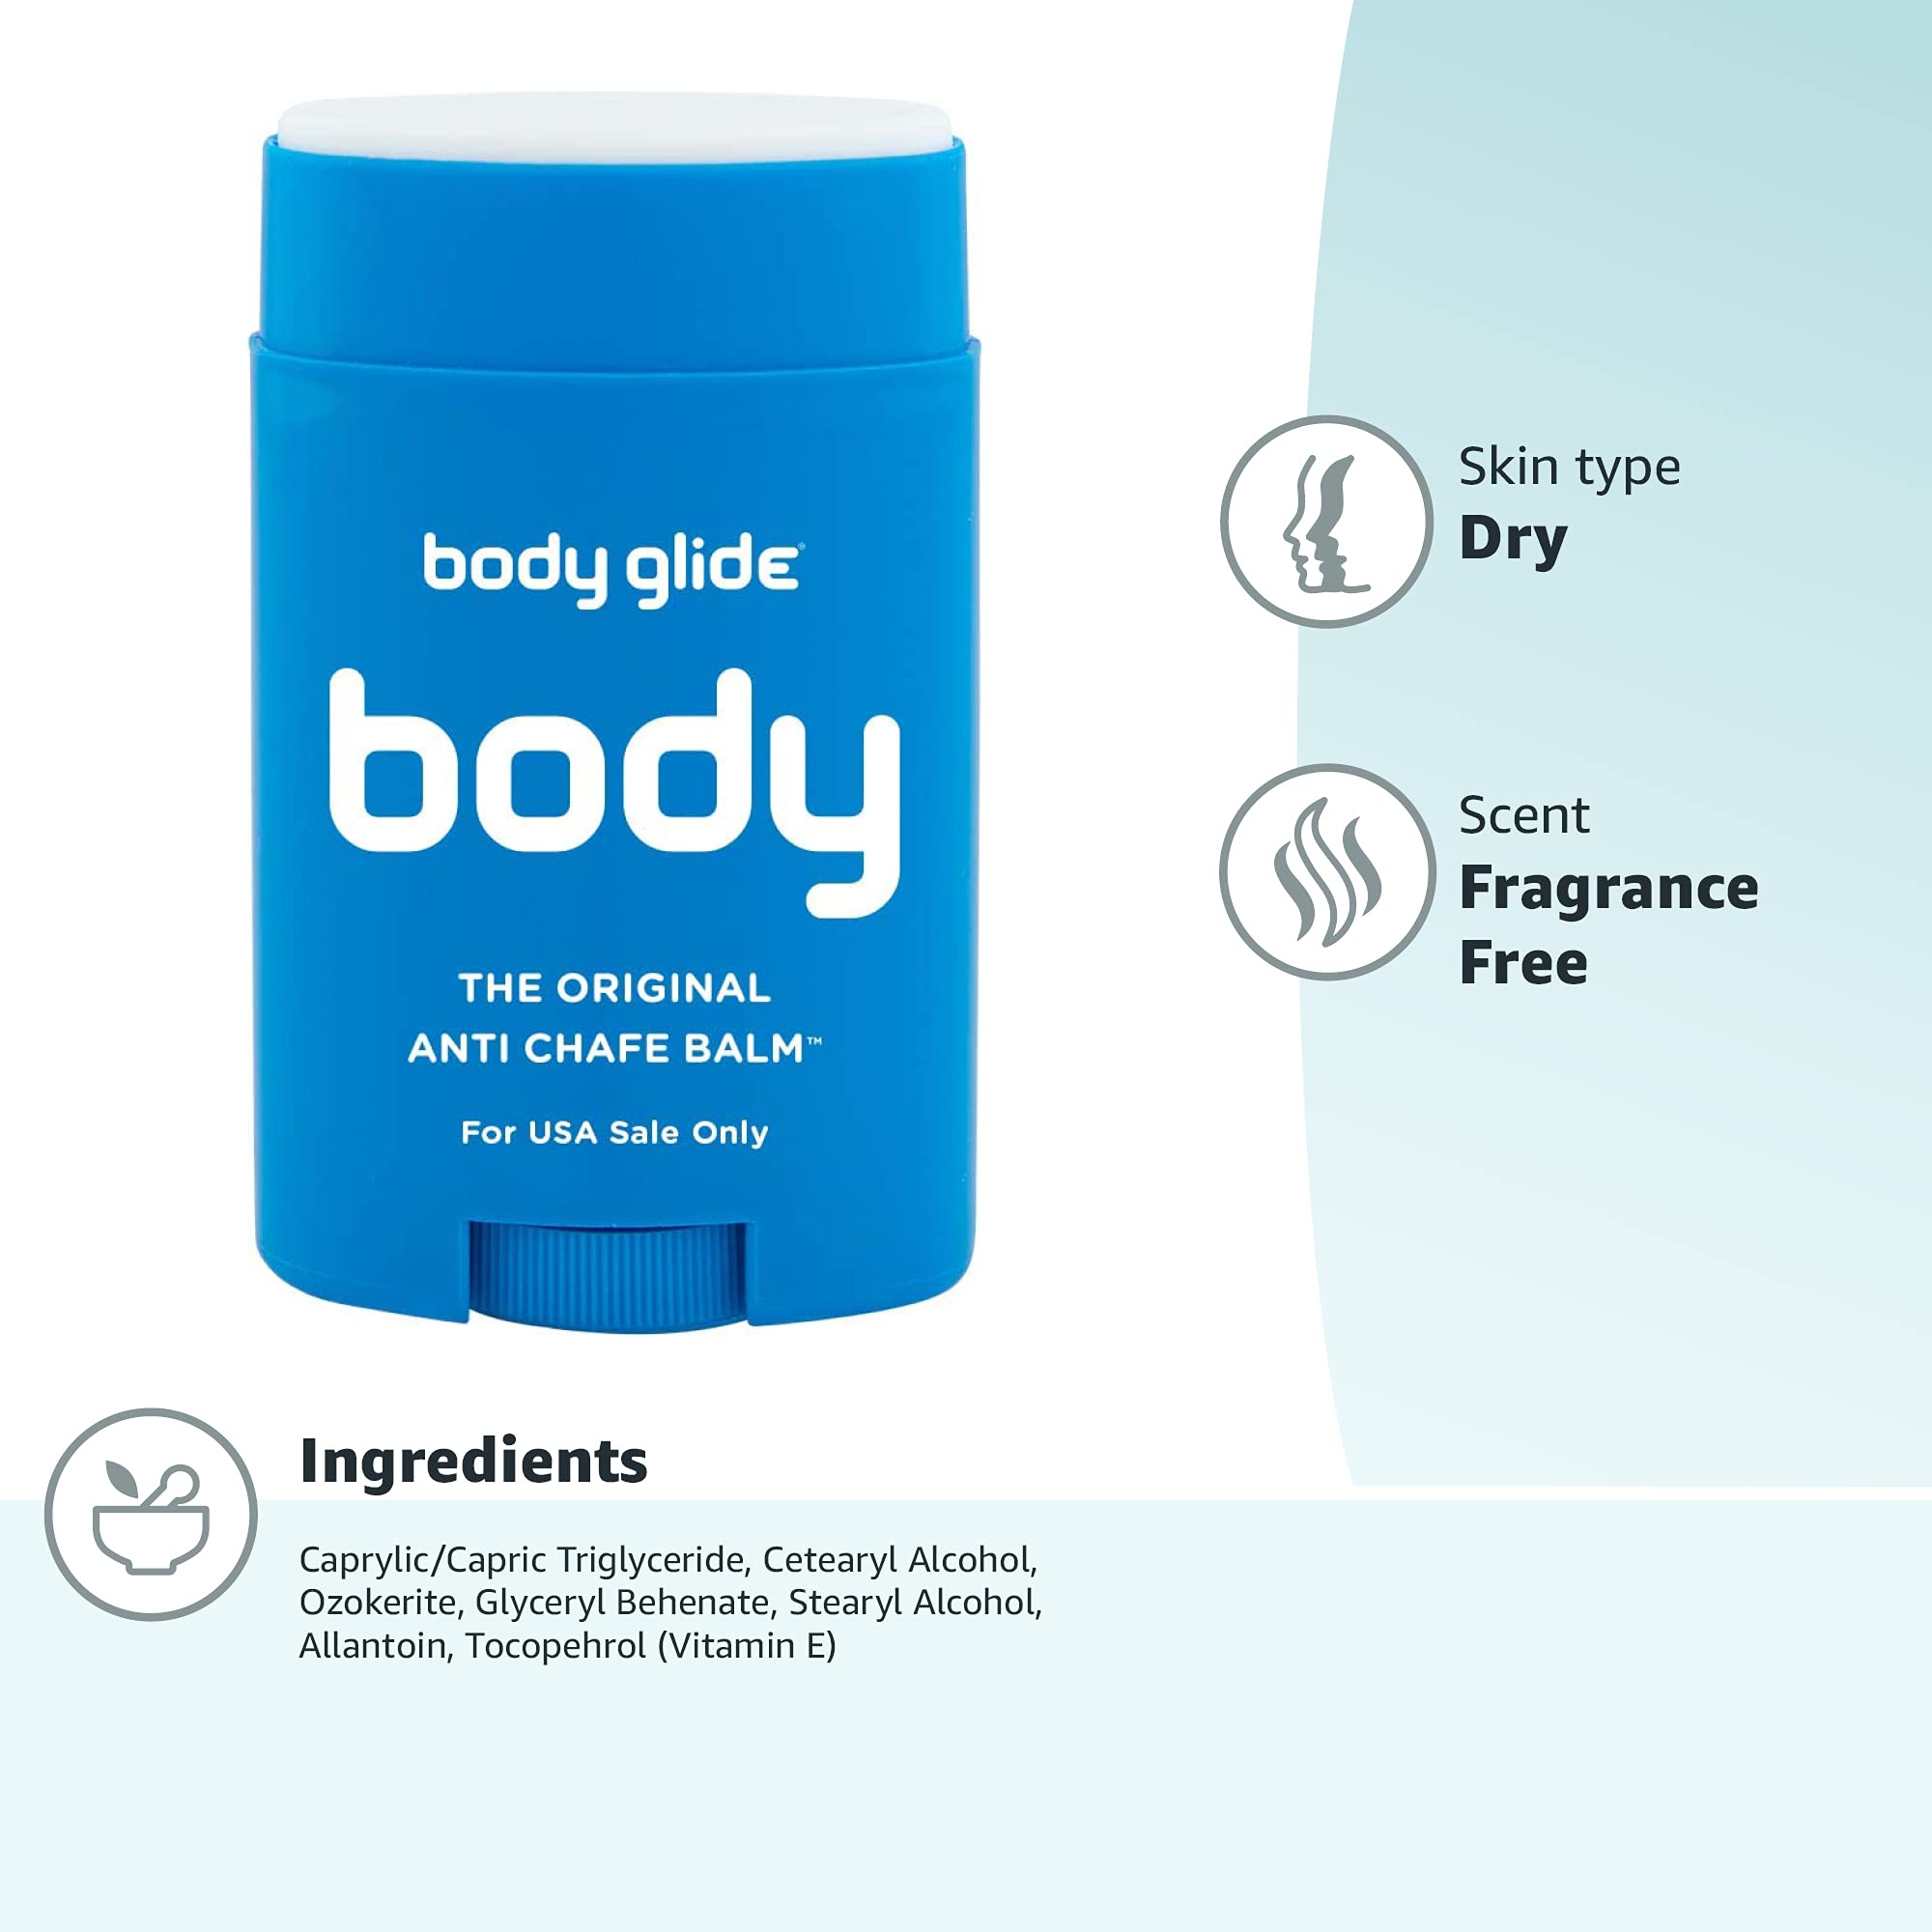 Body Glide Original Anti Chafing Stick Balm1.5oz: chafing cream in stick form. Anti chafe stick to prevent rubbing leading to chafing & raw skin. Use for arm, chest, butt, ball chafing & thigh chafing